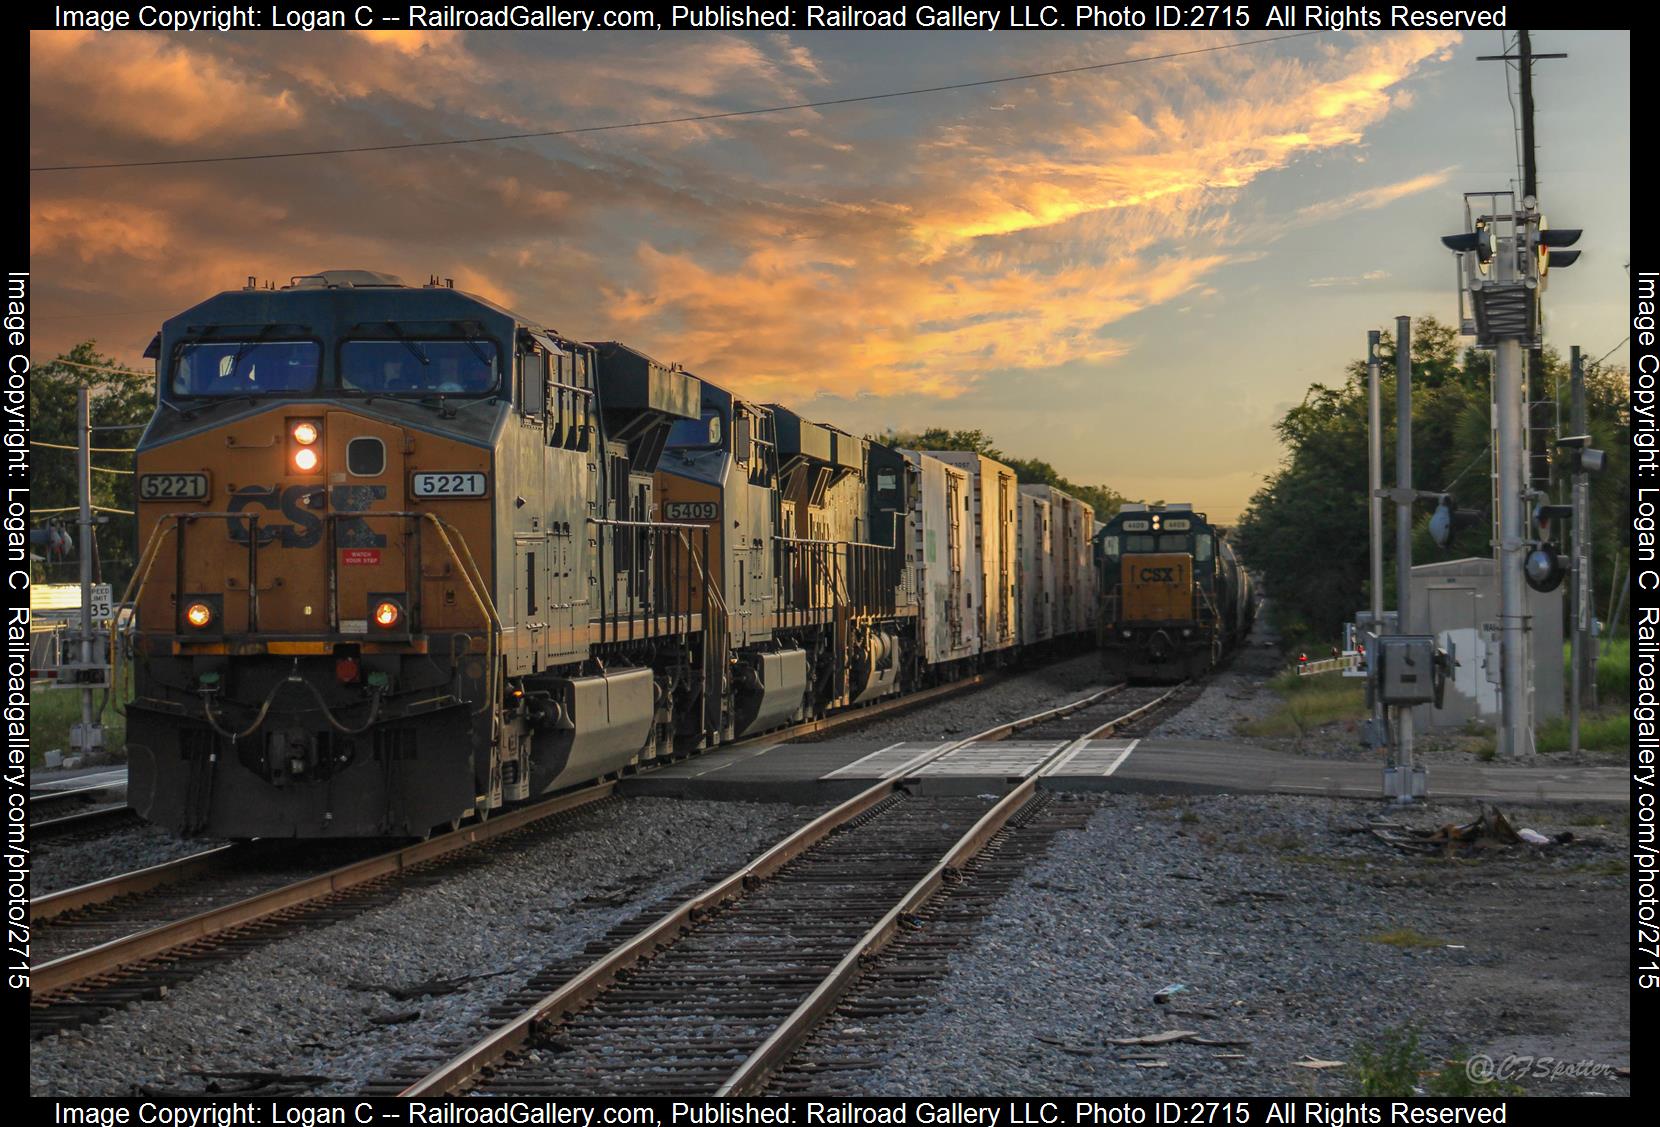 CSX 5221 CSX 5409 CSX 3235 is a class ES40DC ES44AH and  is pictured in Lakeland, Florida, USA.  This was taken along the Lakeland Sub on the CSX. Photo Copyright: Logan C uploaded to Railroad Gallery on 12/18/2023. This photograph of CSX 5221 CSX 5409 CSX 3235 was taken on Tuesday, August 15, 2023. All Rights Reserved. 